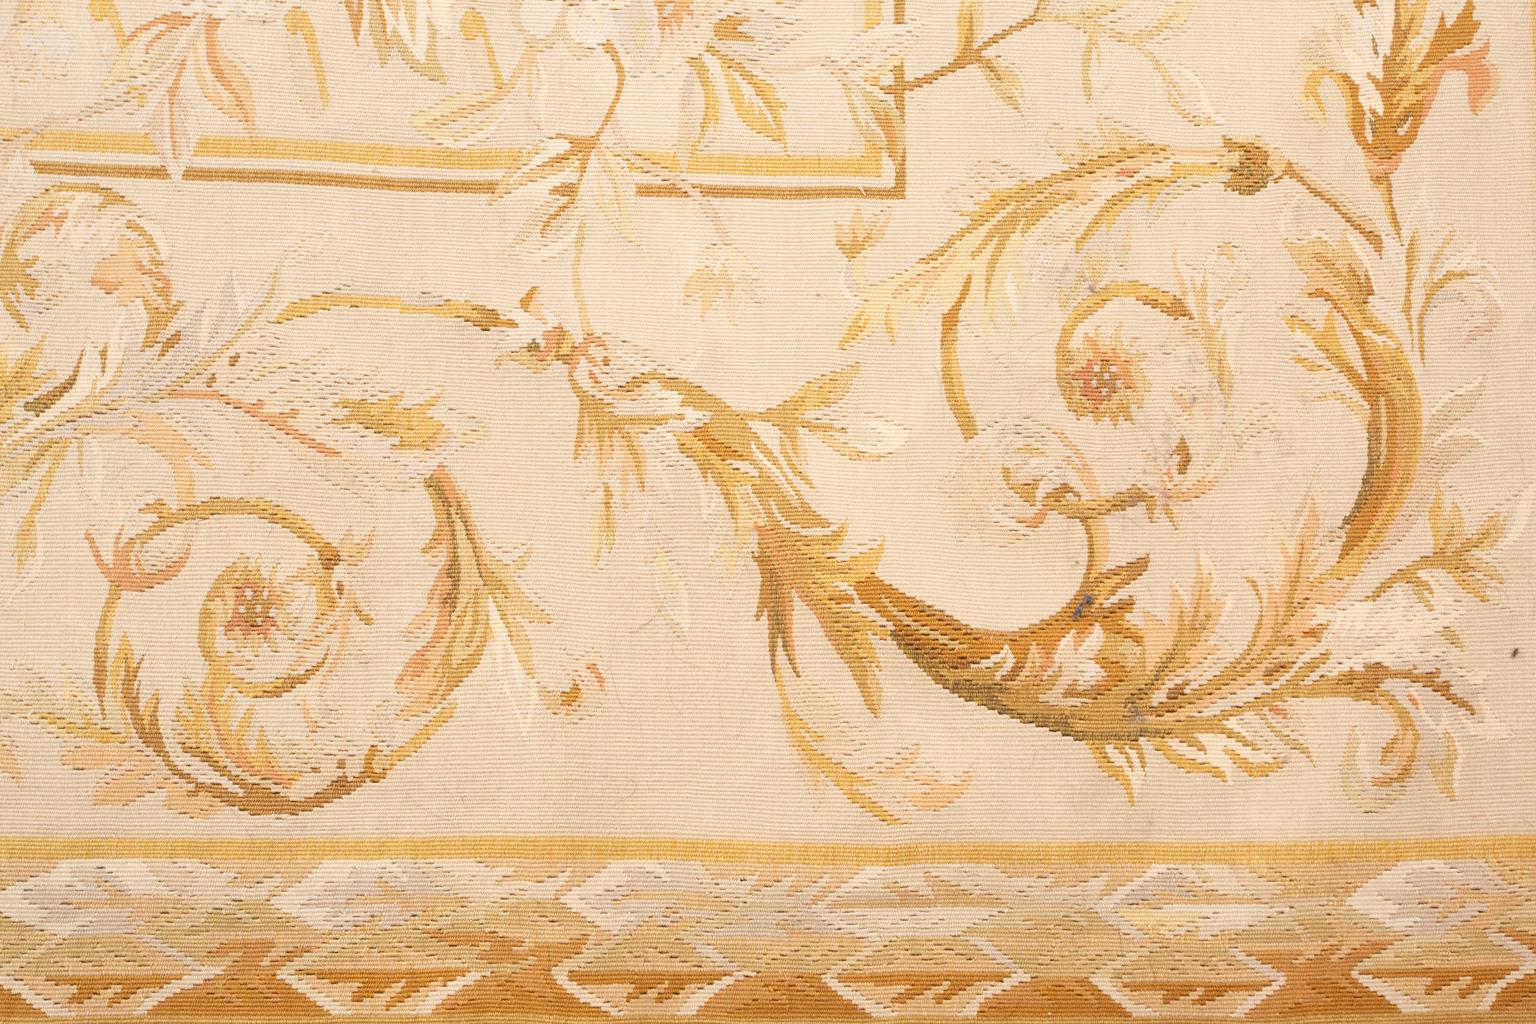 Provenance: a Park Avenue Collection

A beautiful, late 19th century French Aubusson carpet having lush, leafy rose branches on the cream field within a sand scrolling vinery border. The towns of Aubusson and Felletin, in the Creuse region of